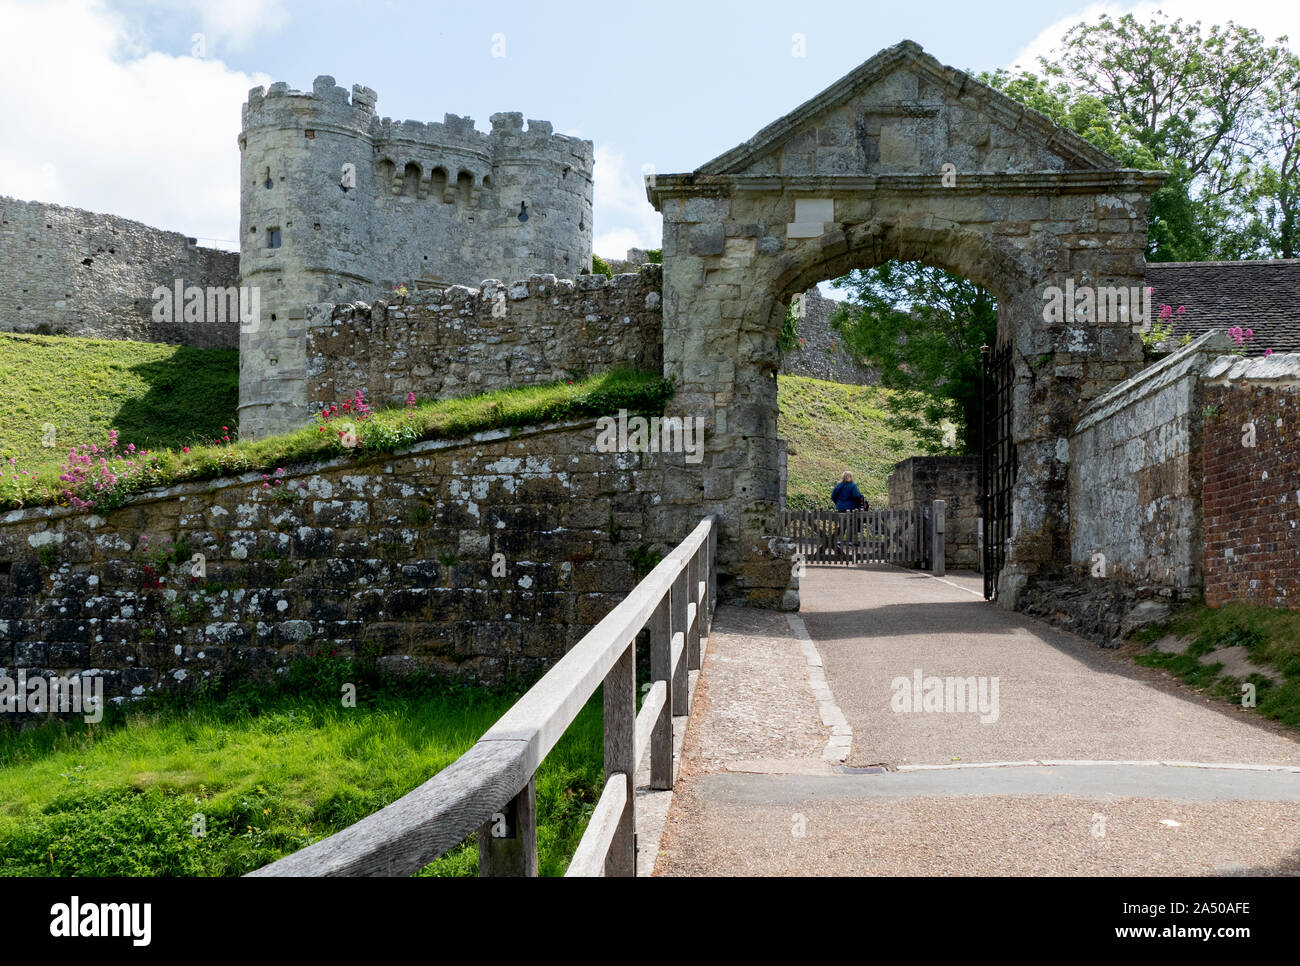 The arched gateway entrance to the entry tower of Carisbrooke Castle on ...